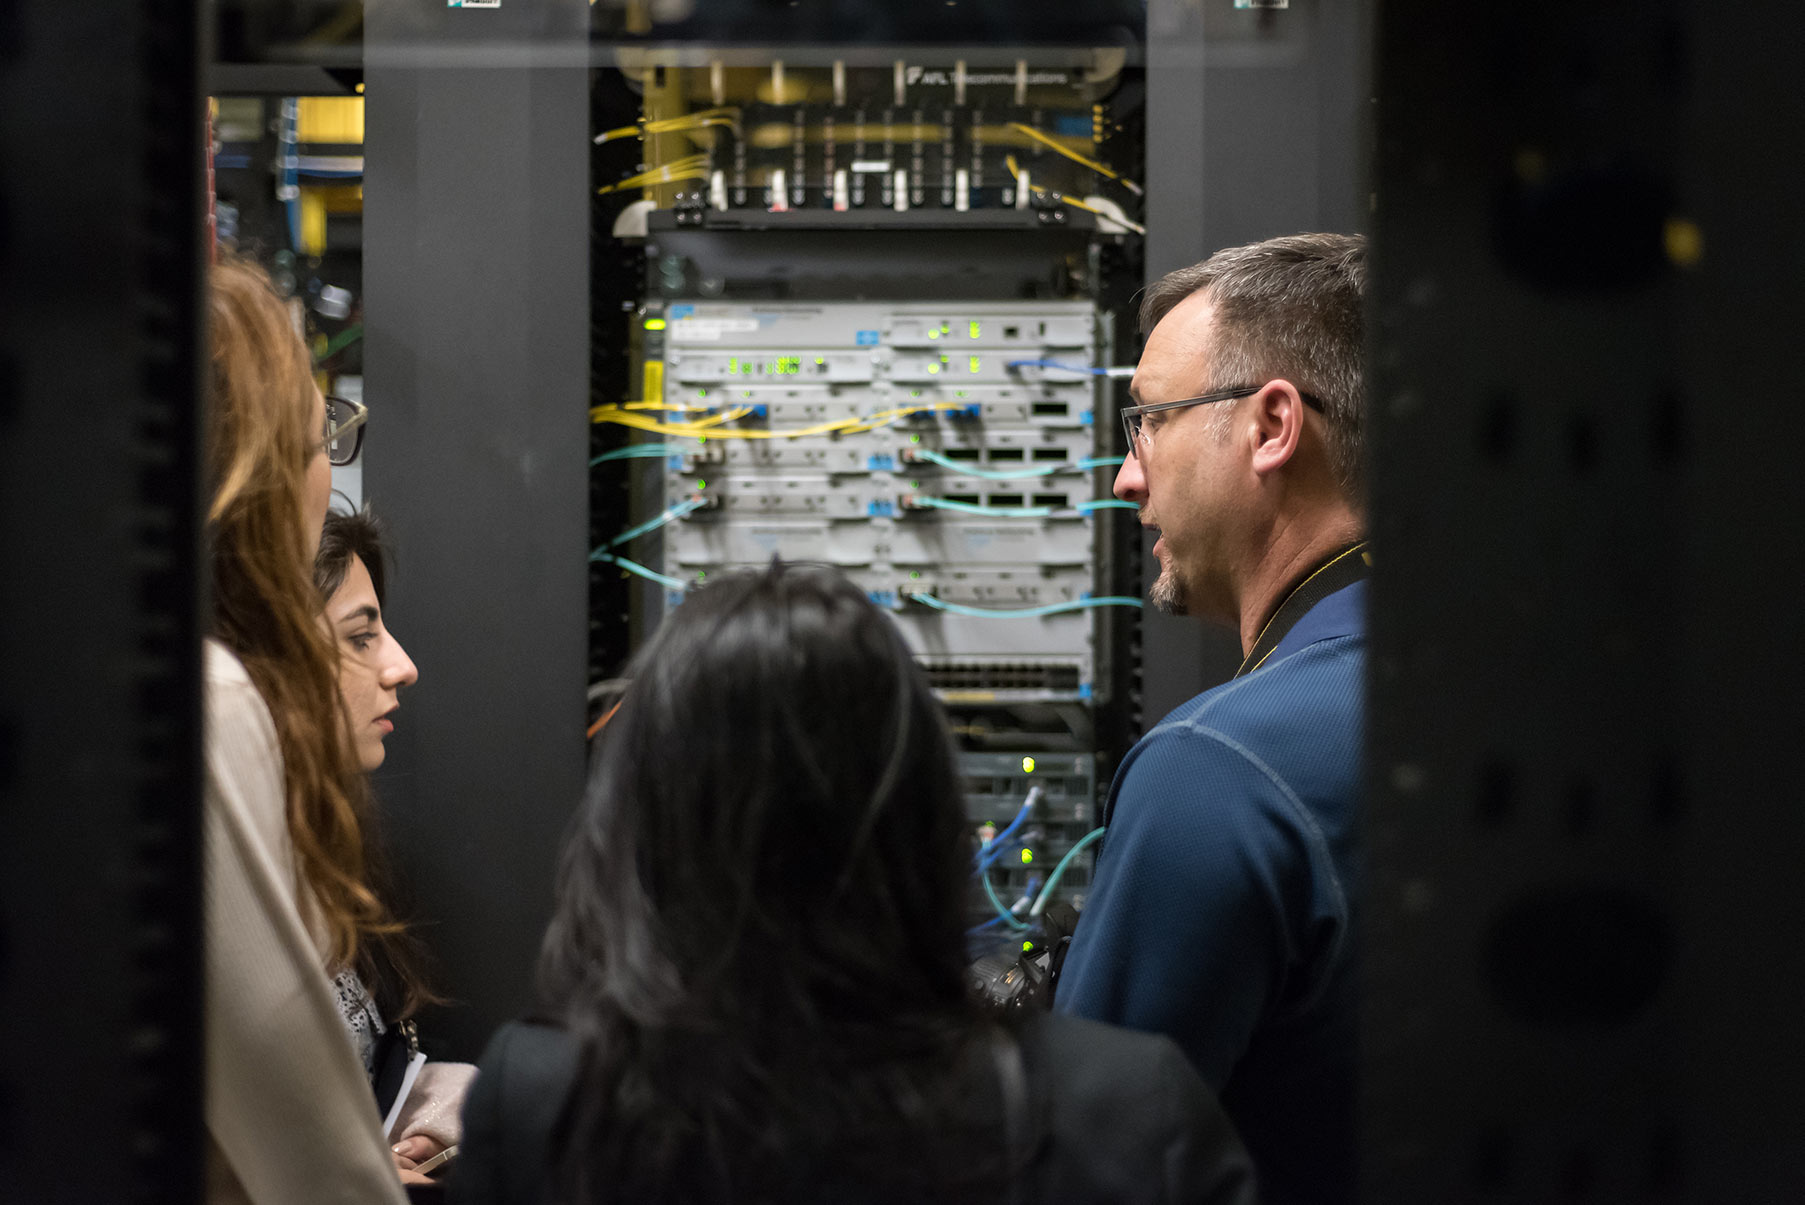 A man gives a data center tour to three women. He is talking and they are all looking at a large server rack.